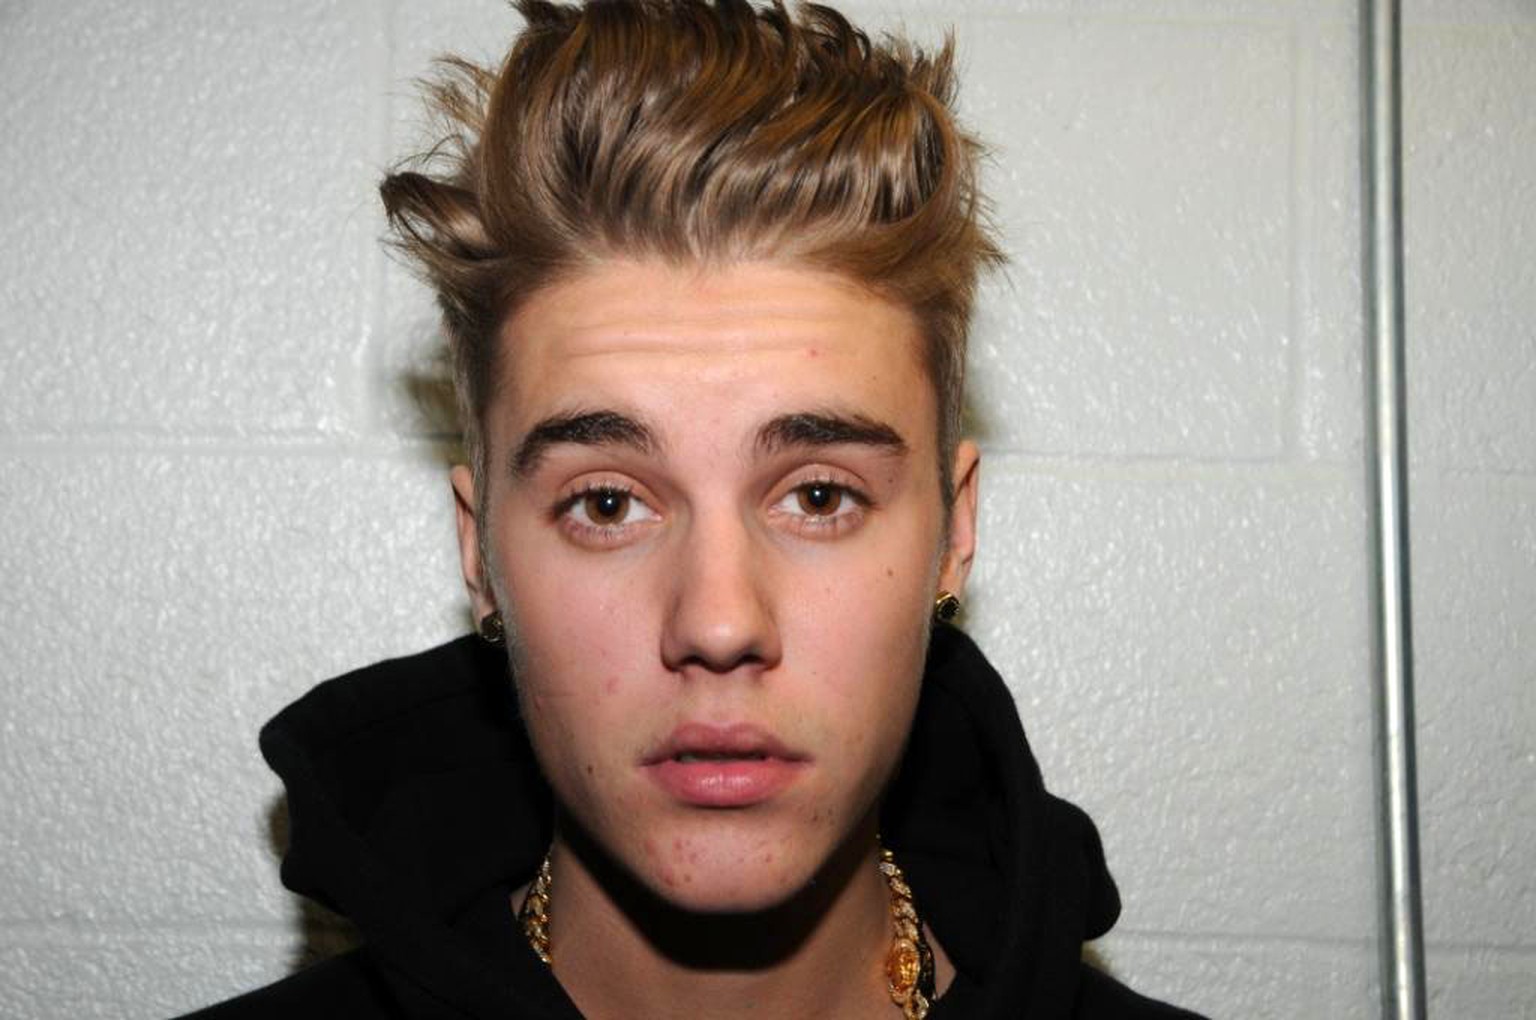 FILE - This Jan. 23, 2014 file photo made available by the Miami Beach Police Dept., shows Justin Bieber at the police station in Miami Beach, Fla. According to two people directly involved with the c ...